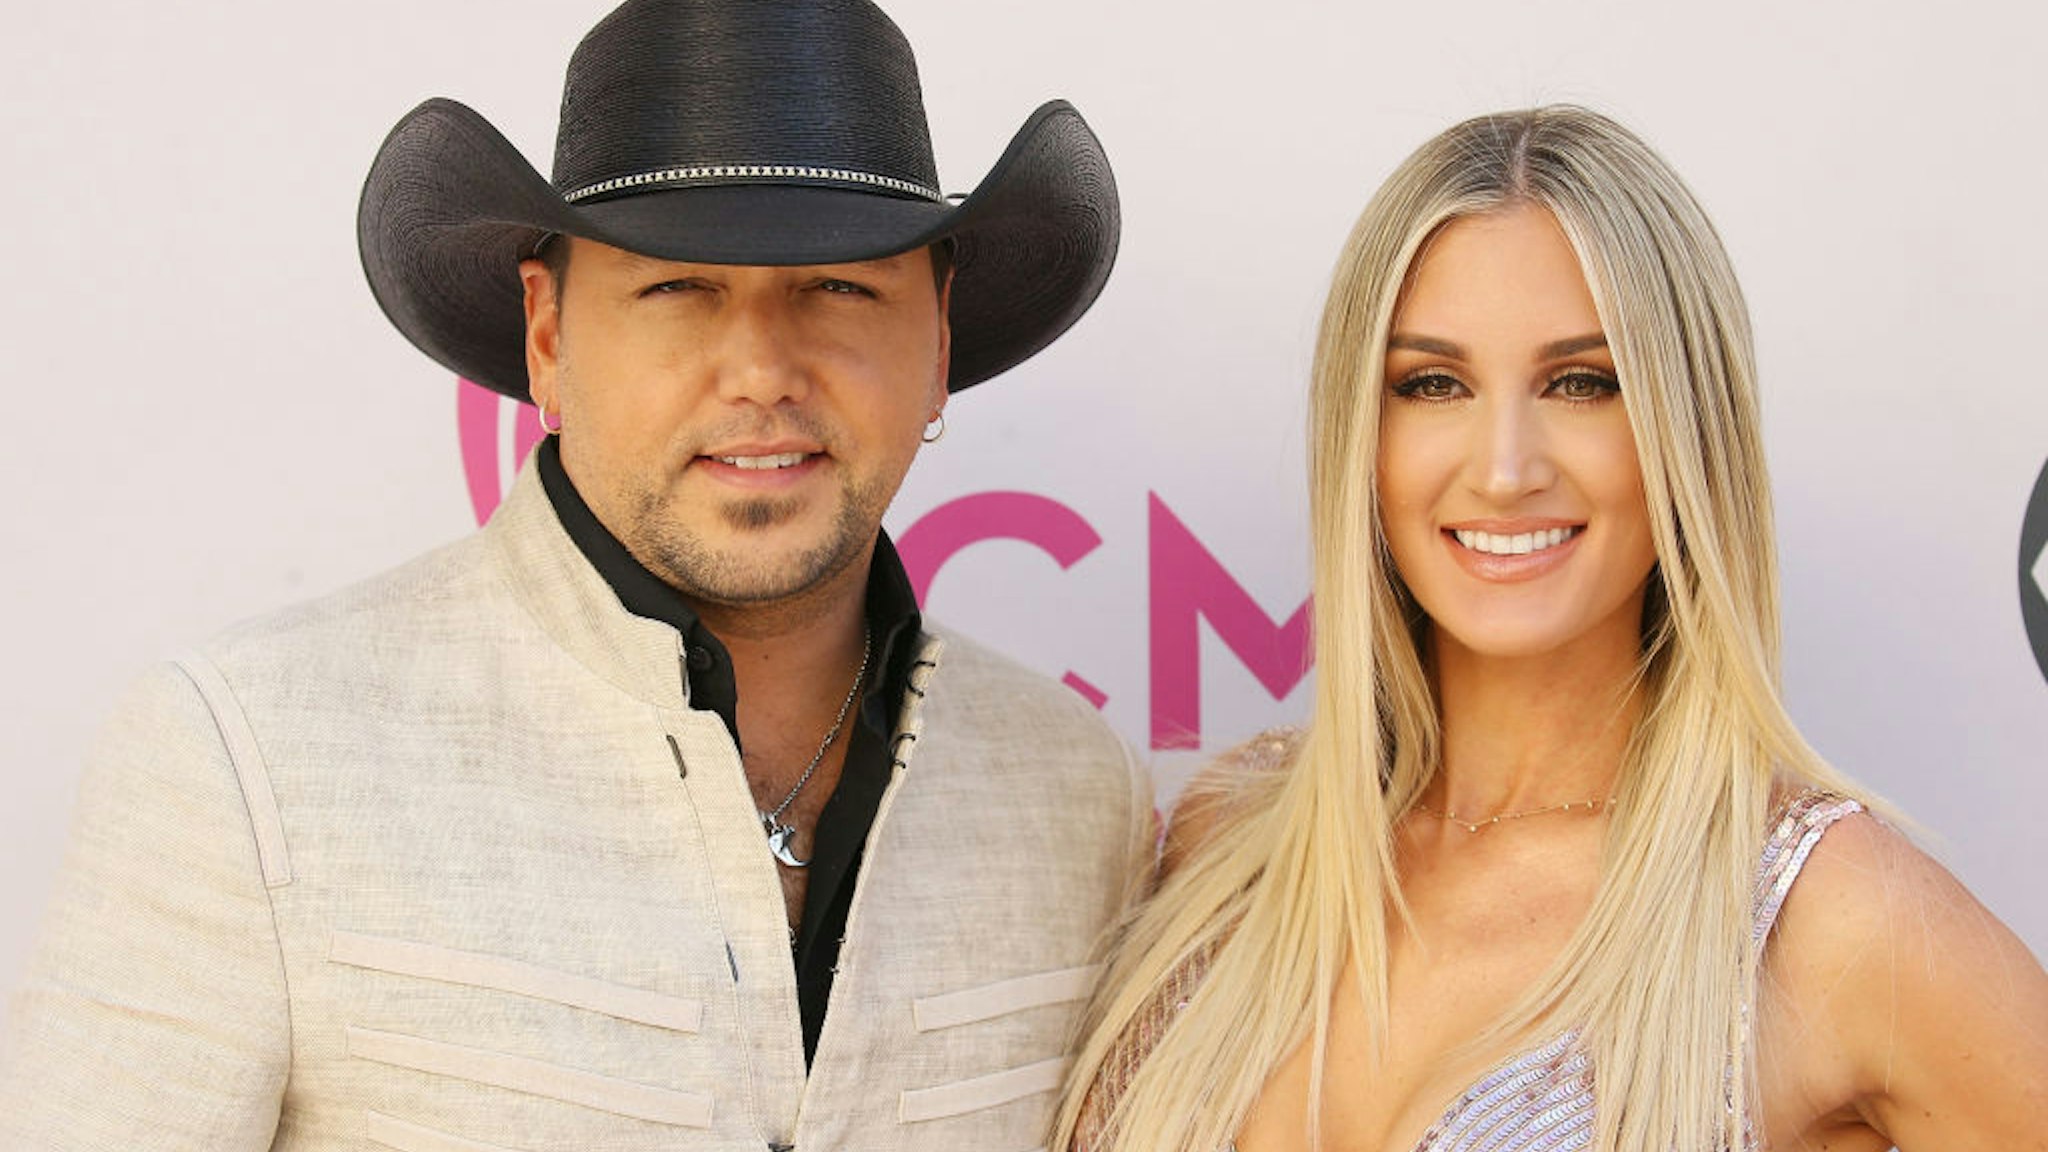 Jason Aldean and Brittany Kerr arrive at the 52nd Academy of Country Music Awards held at T-Mobile Arena on April 2, 2017 in Las Vegas, Nevada.